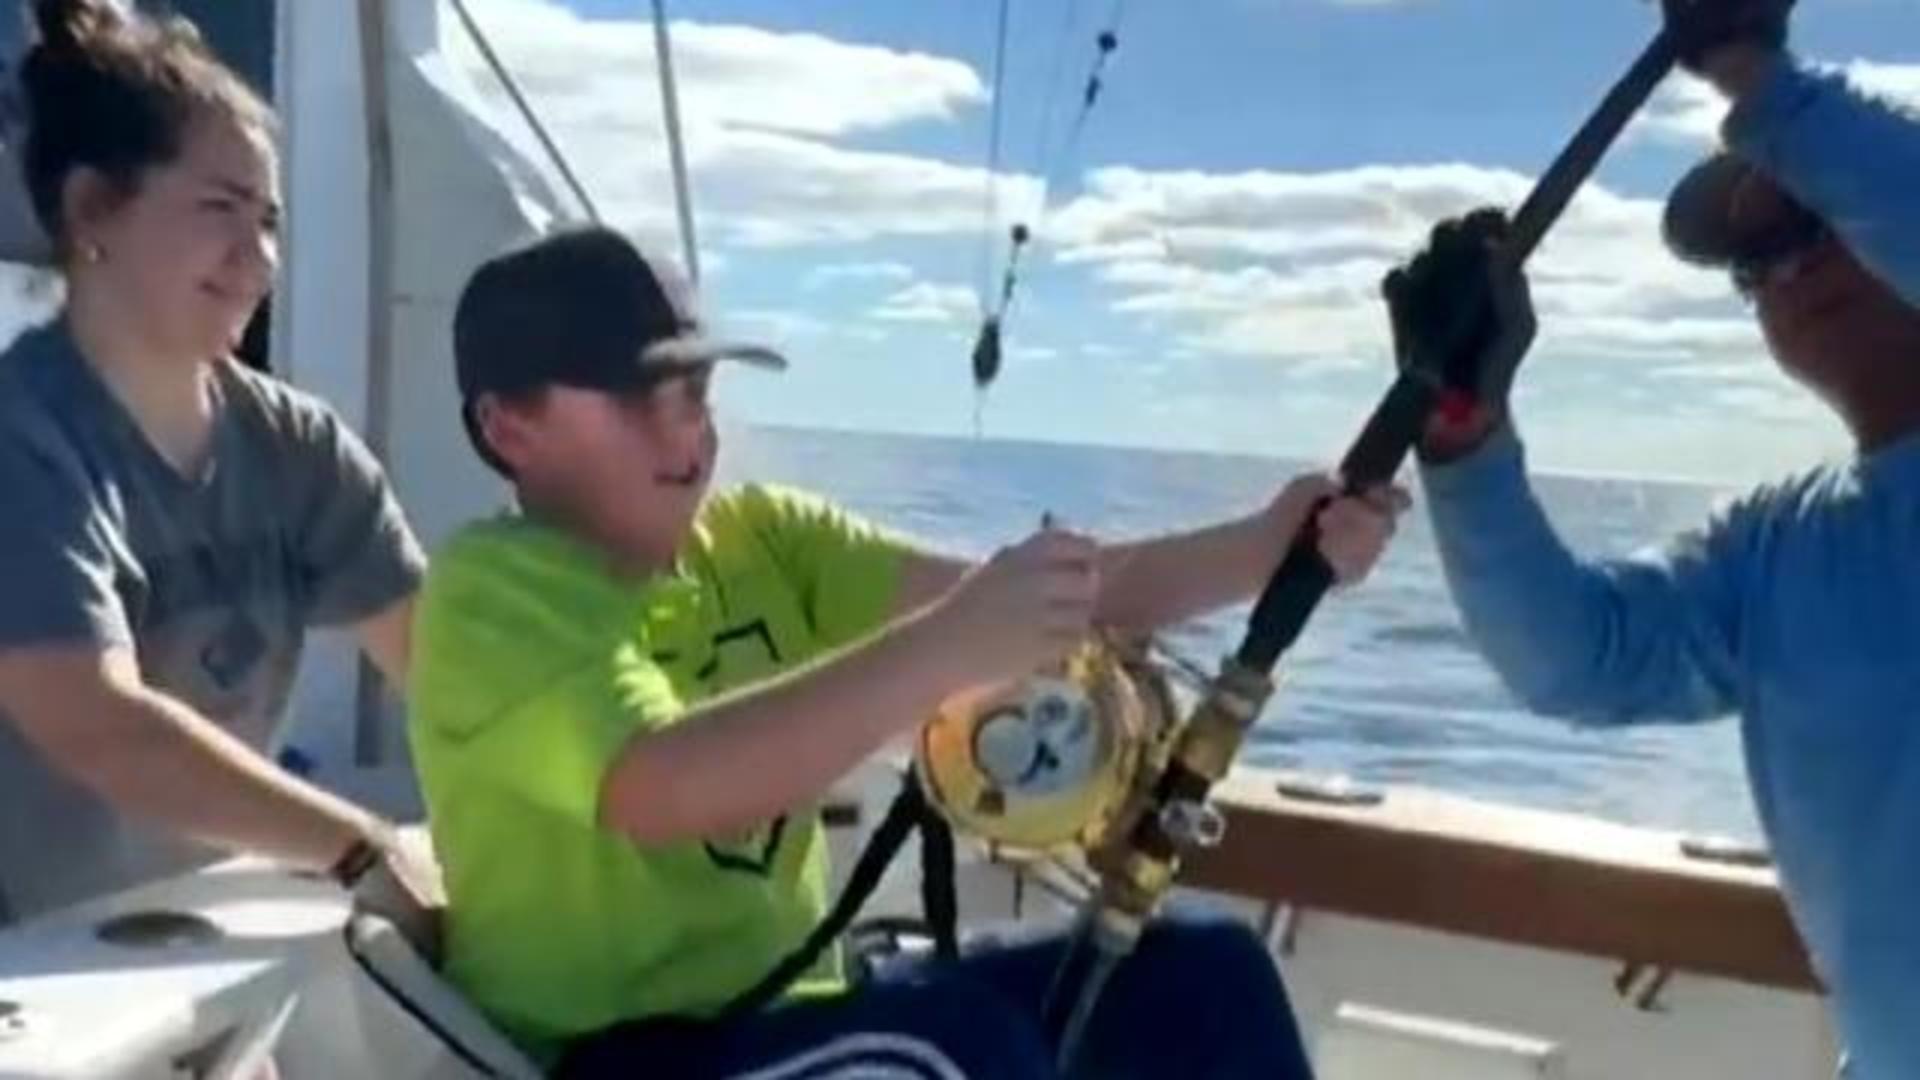 12-year-old boy catches great white shark off Florida coast - CBS